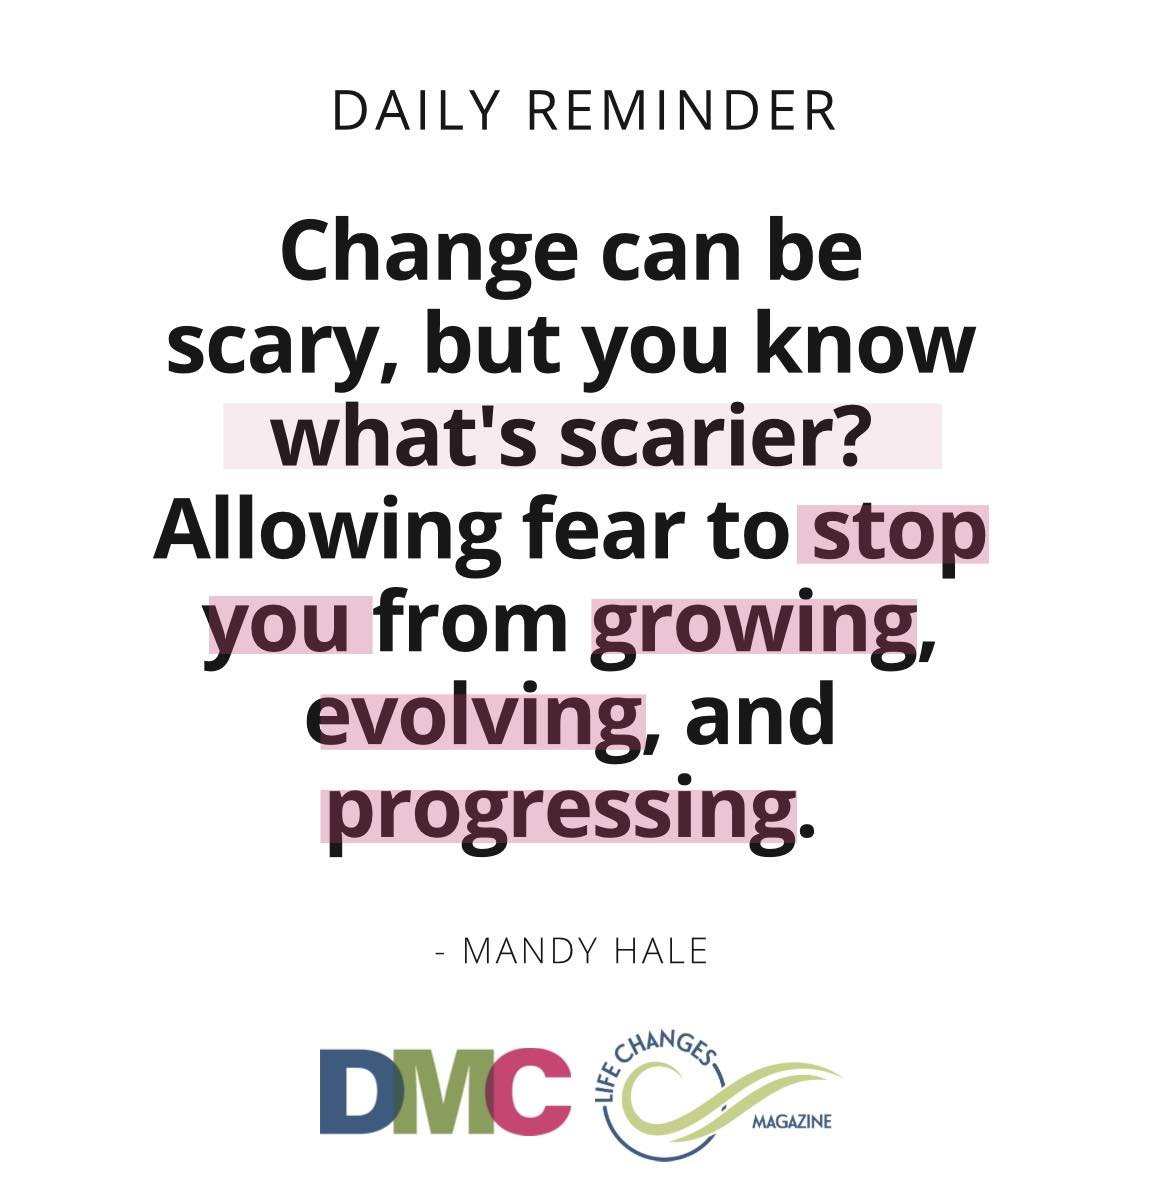 Embracing change is the first step toward personal growth and empowerment. In times of transition, remember that courage is not the absence of fear, but the willingness to move forward despite it. 

Join our community of resilient individuals navigat